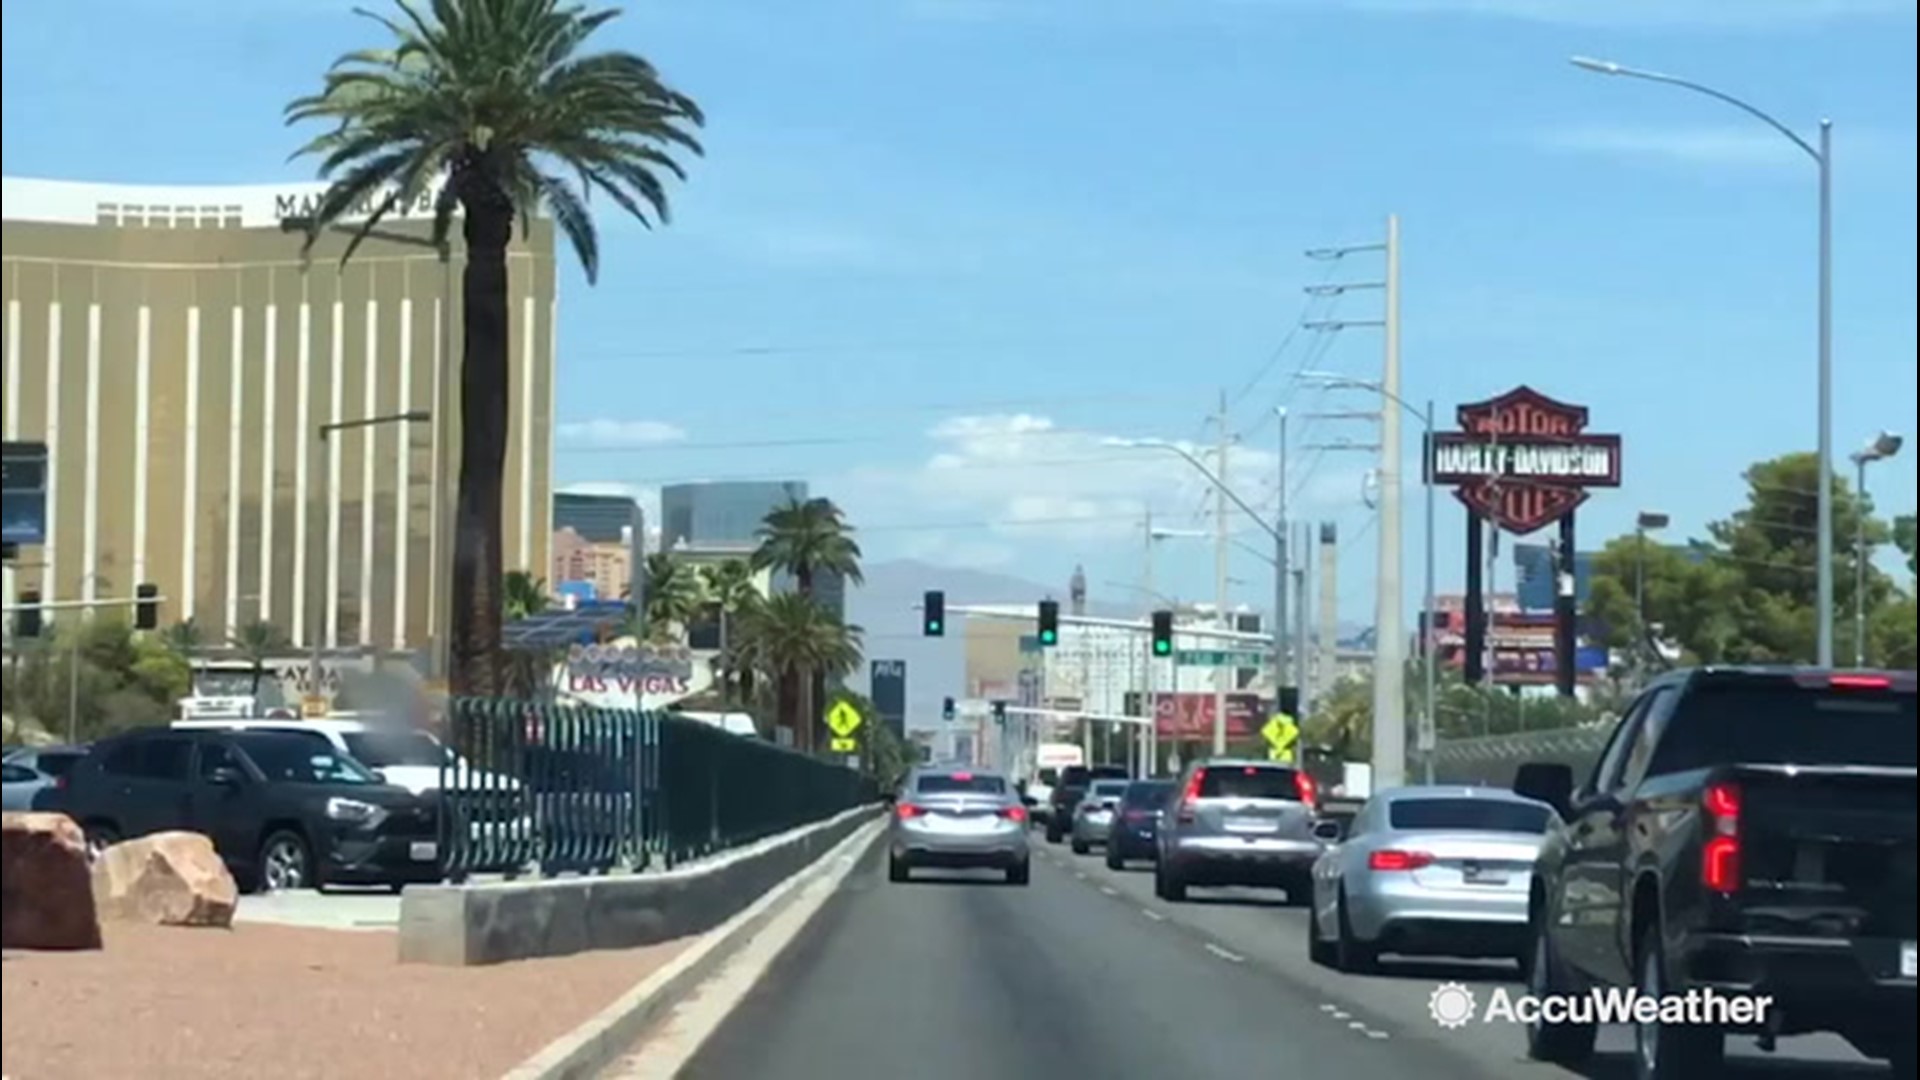 Temperatures in Las Vegas, Nevada were as high as 108 degrees Fahrenheit on August 5 as people endure the heat.